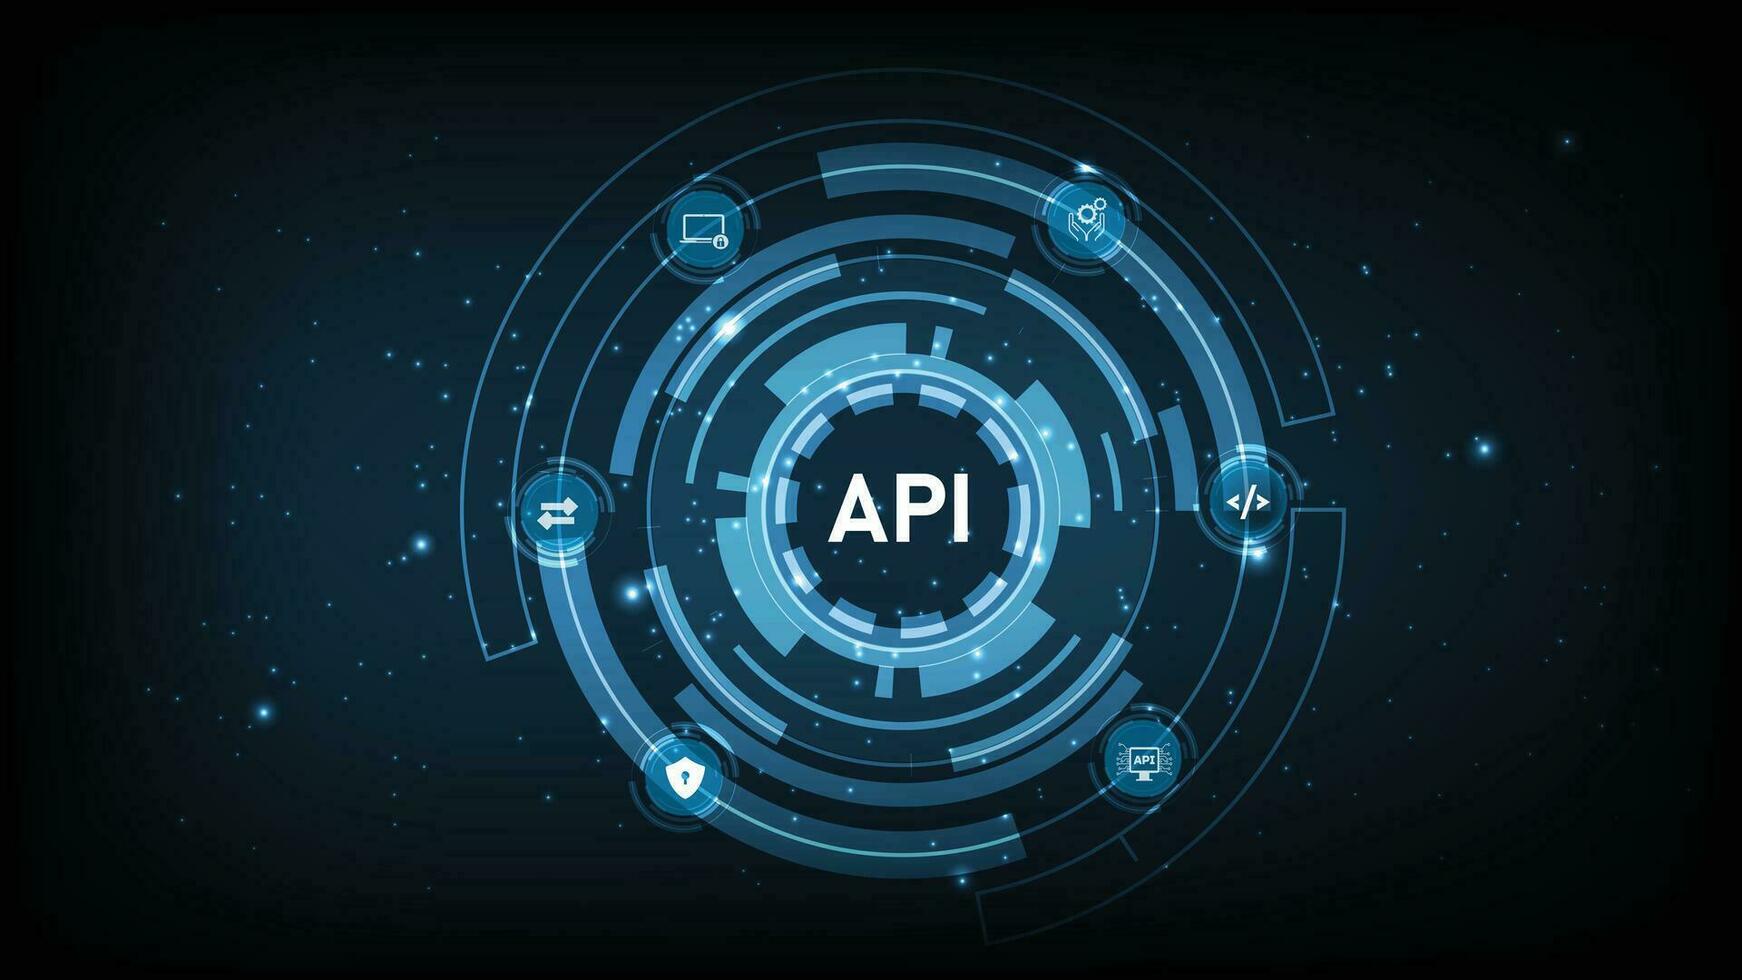 Application Programming Interface API. Software development tools, information technology, modern technology, internet, and networking concepts on a dark blue background. vector